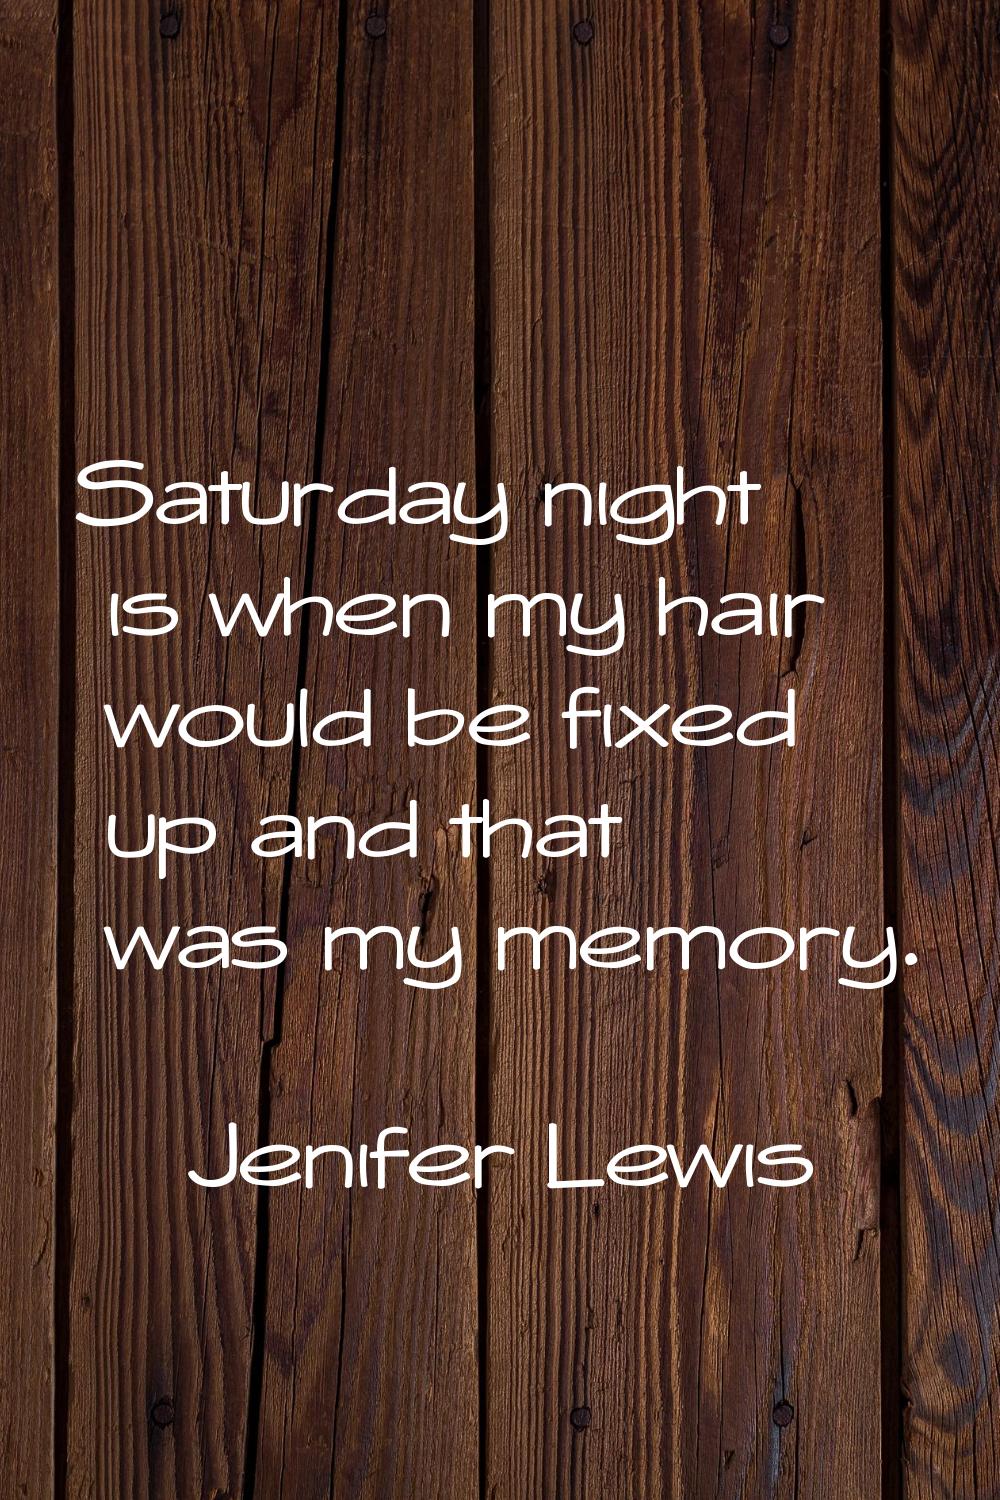 Saturday night is when my hair would be fixed up and that was my memory.